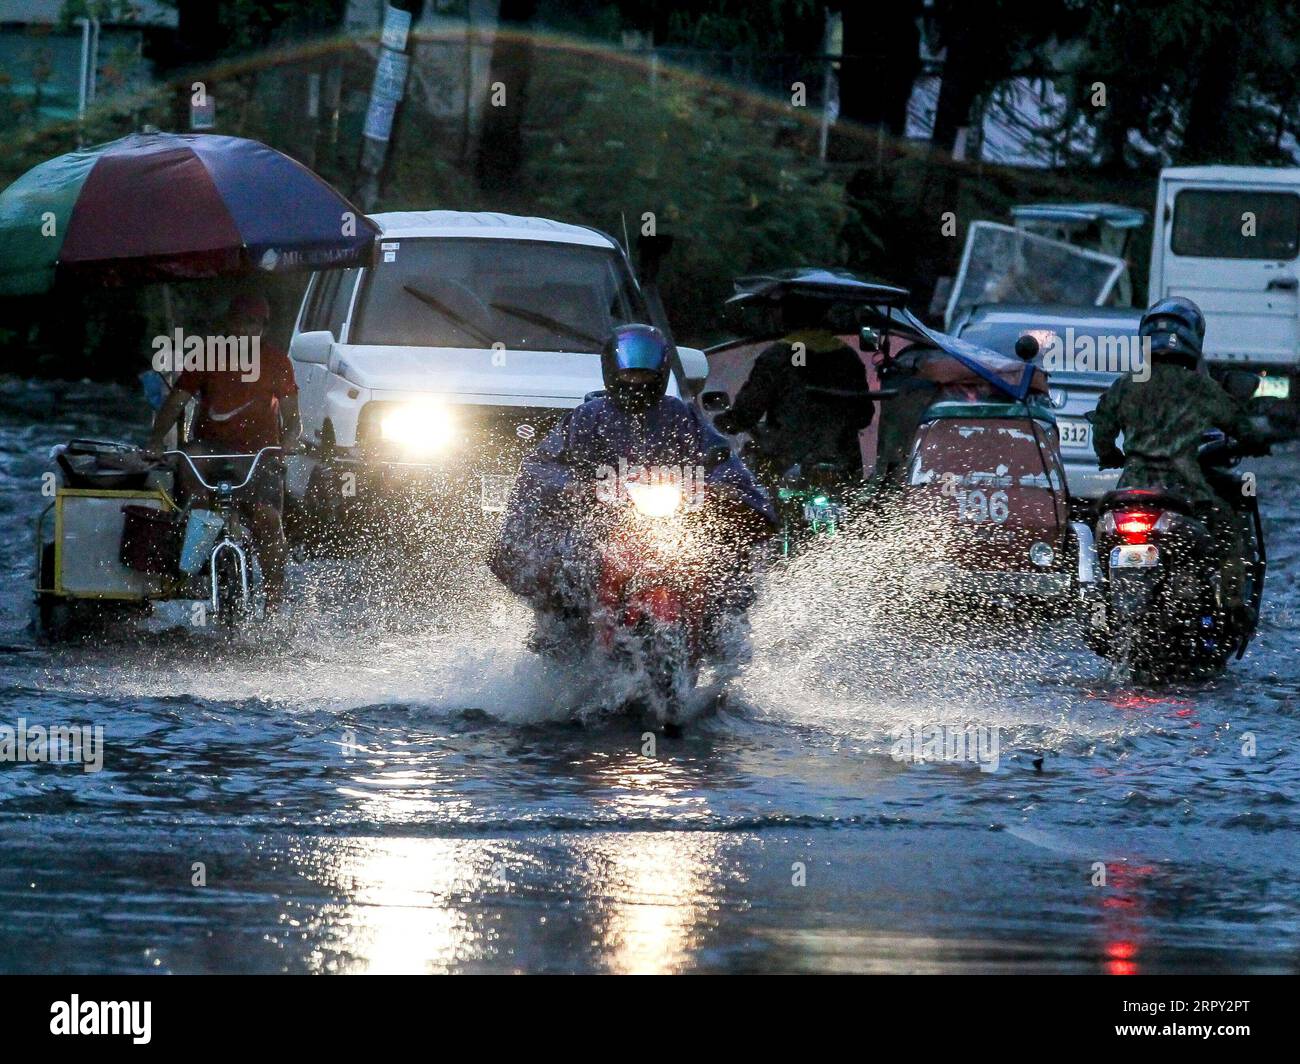 200611 -- MANILA, June 11, 2020 -- People ride their vehicles through a flooded area caused by the heavy rain from the tropical depression locally named Butchoy in Manila, the Philippines, on June 11, 2020.  PHILIPPINES-MANILA-TROPICAL DEPRESSION BUTCHOY ROUELLExUMALI PUBLICATIONxNOTxINxCHN Stock Photo